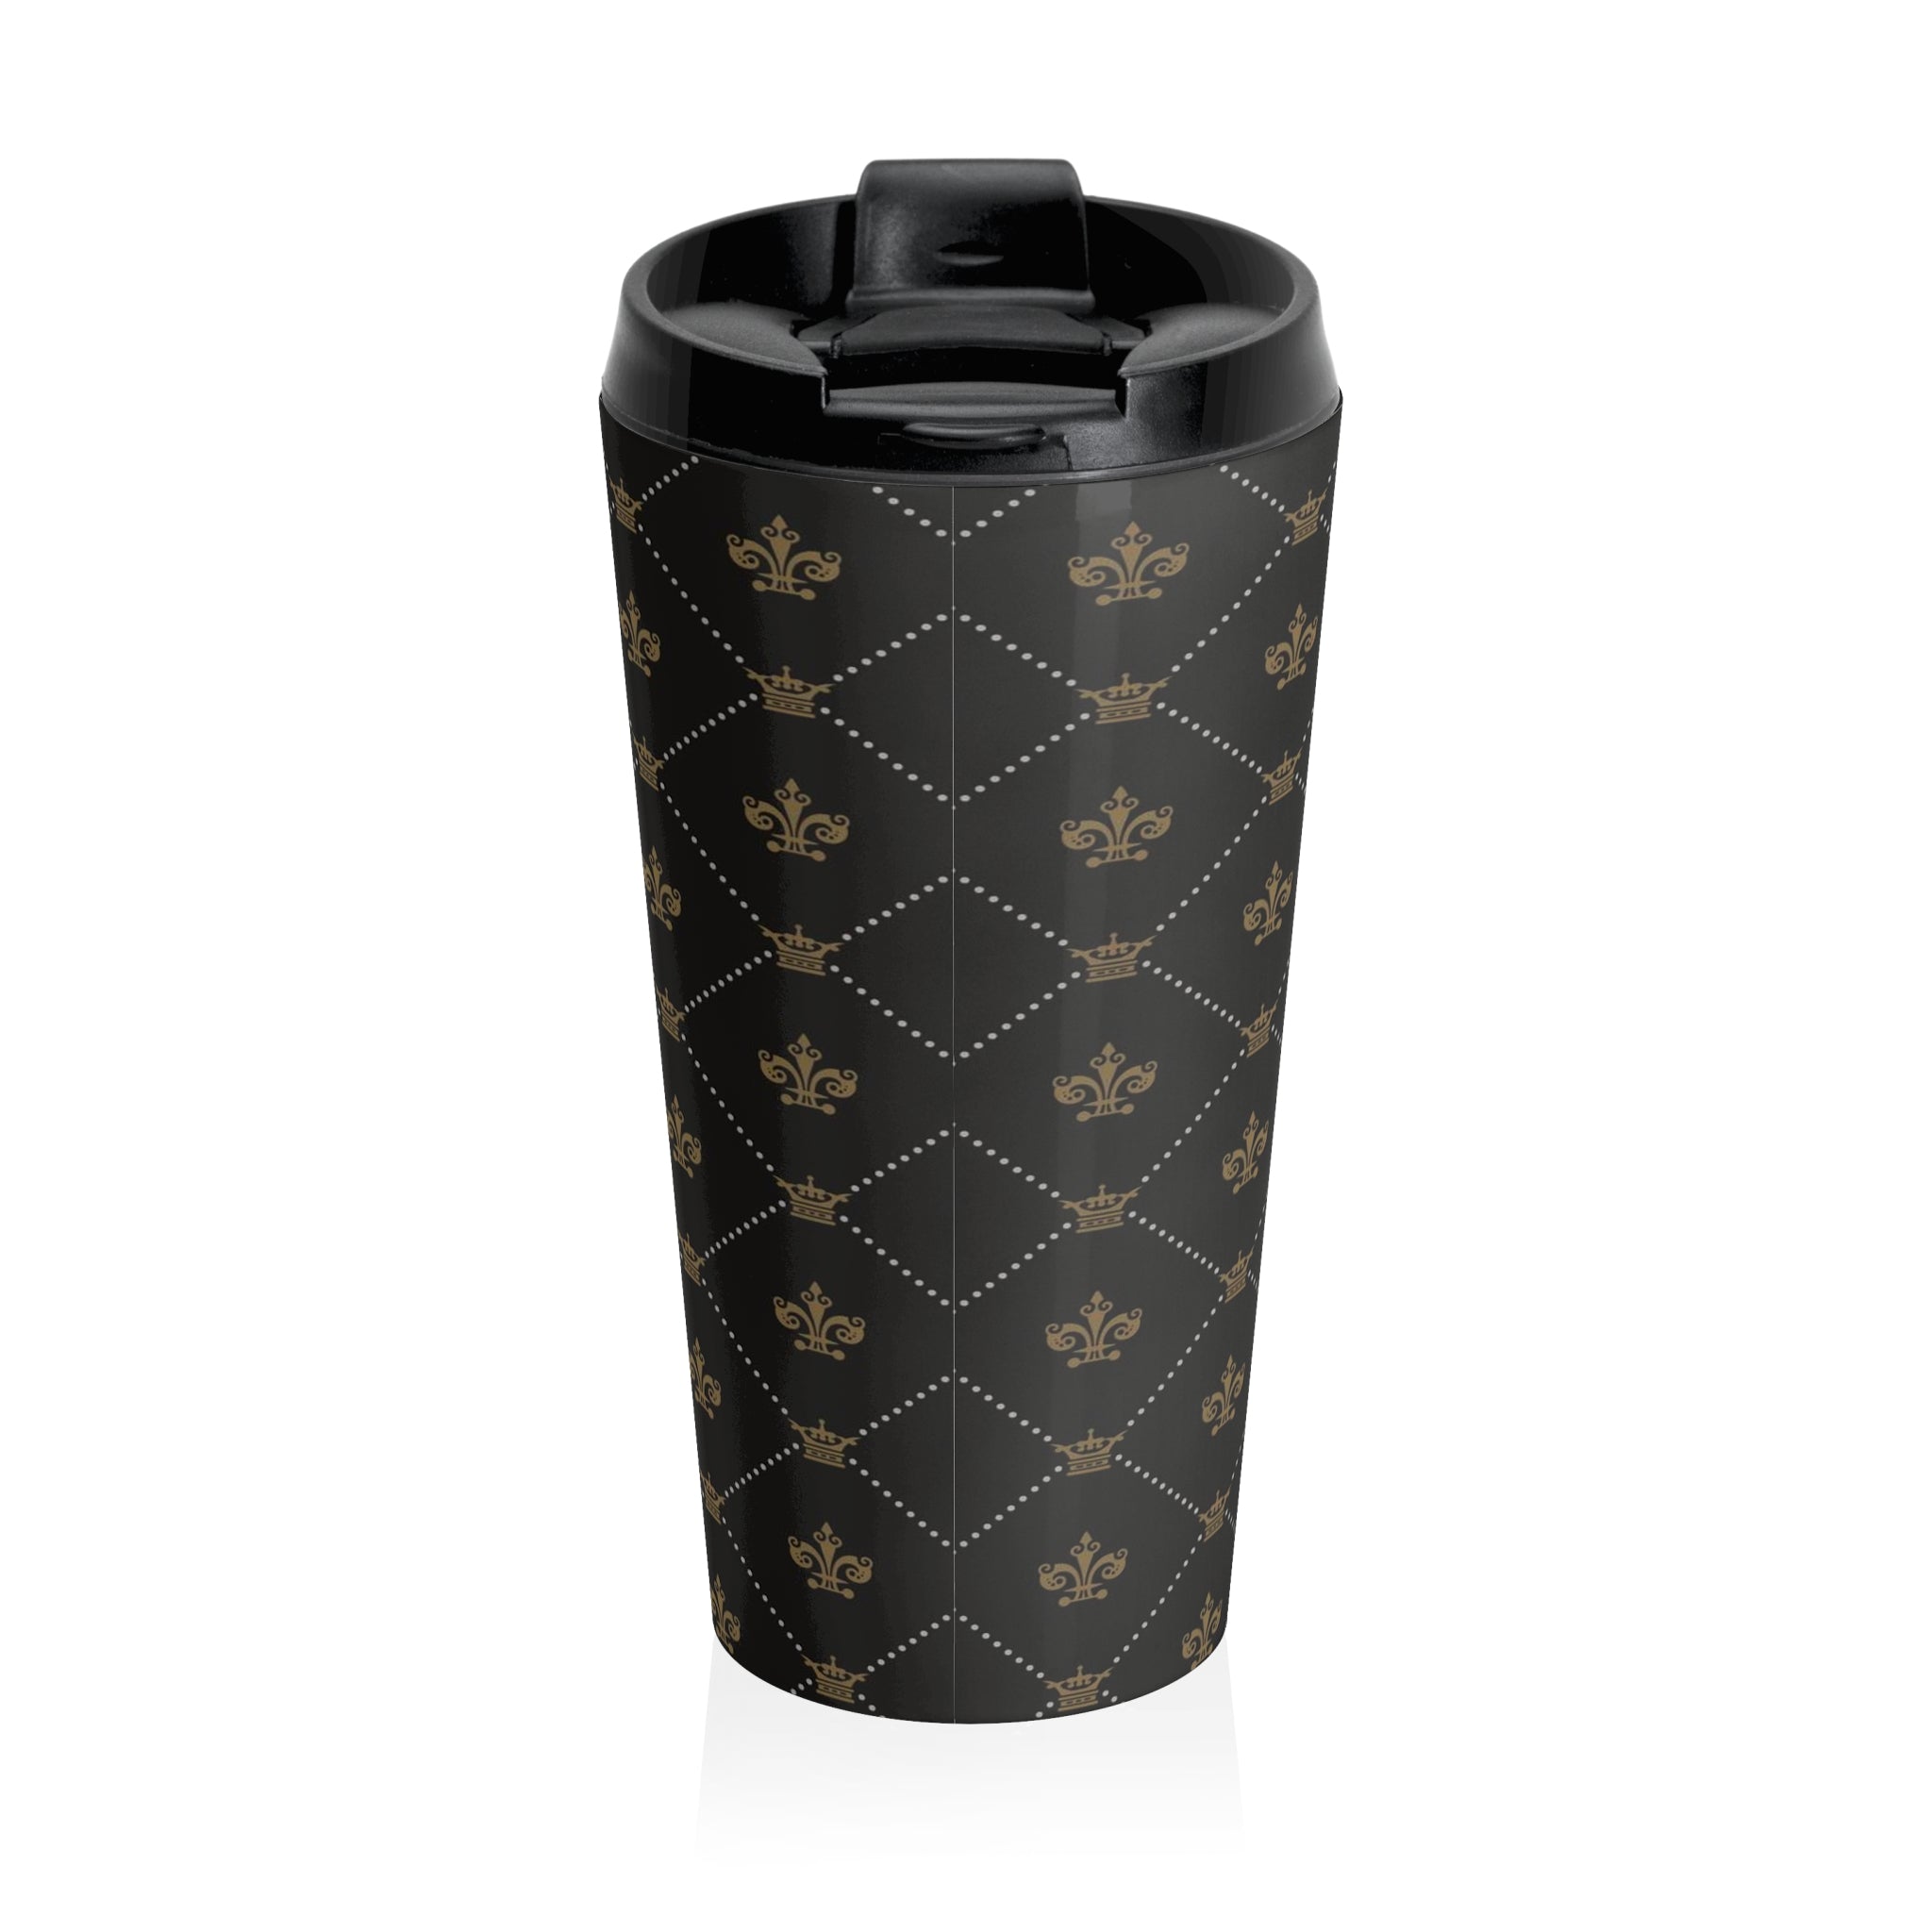  Pass Me My Crown Insulated Stainless Steel Travel Mug, 15oz Patterned Coffee Cup, Cute Travel Mug, Stainless Steel Cup Mug